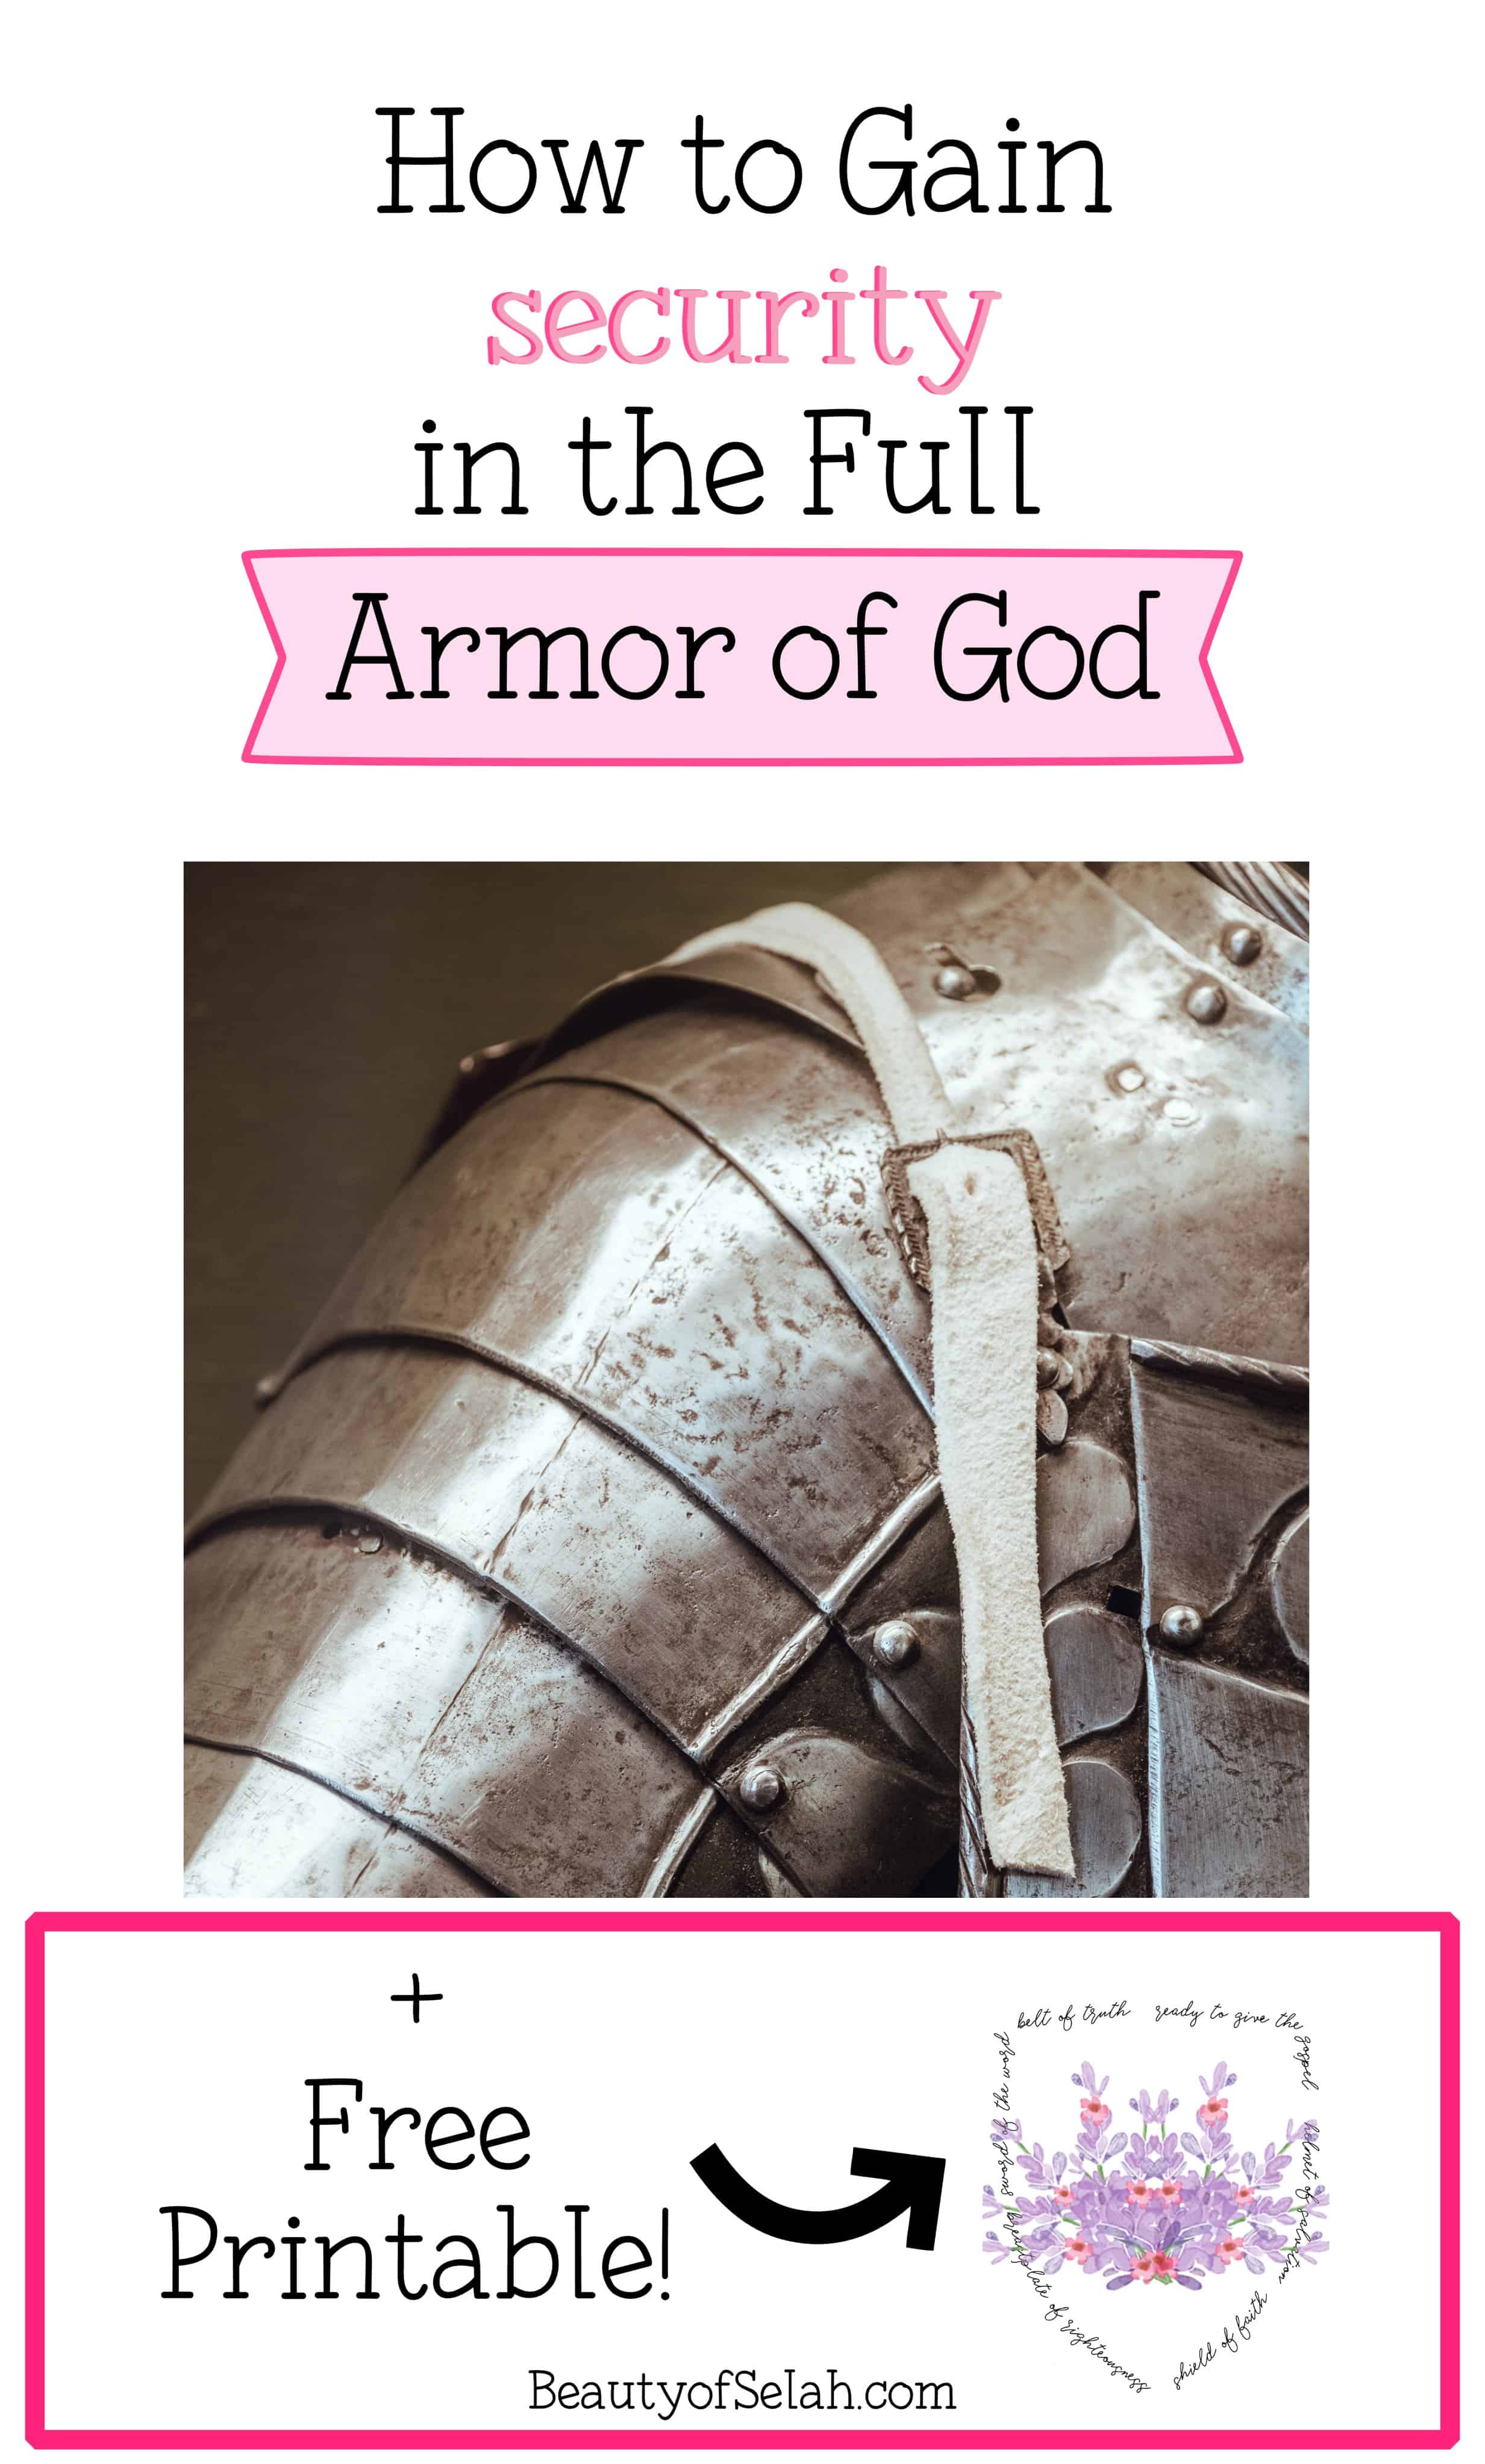 How to Gain Security in the Full Armor of God with Free Printable